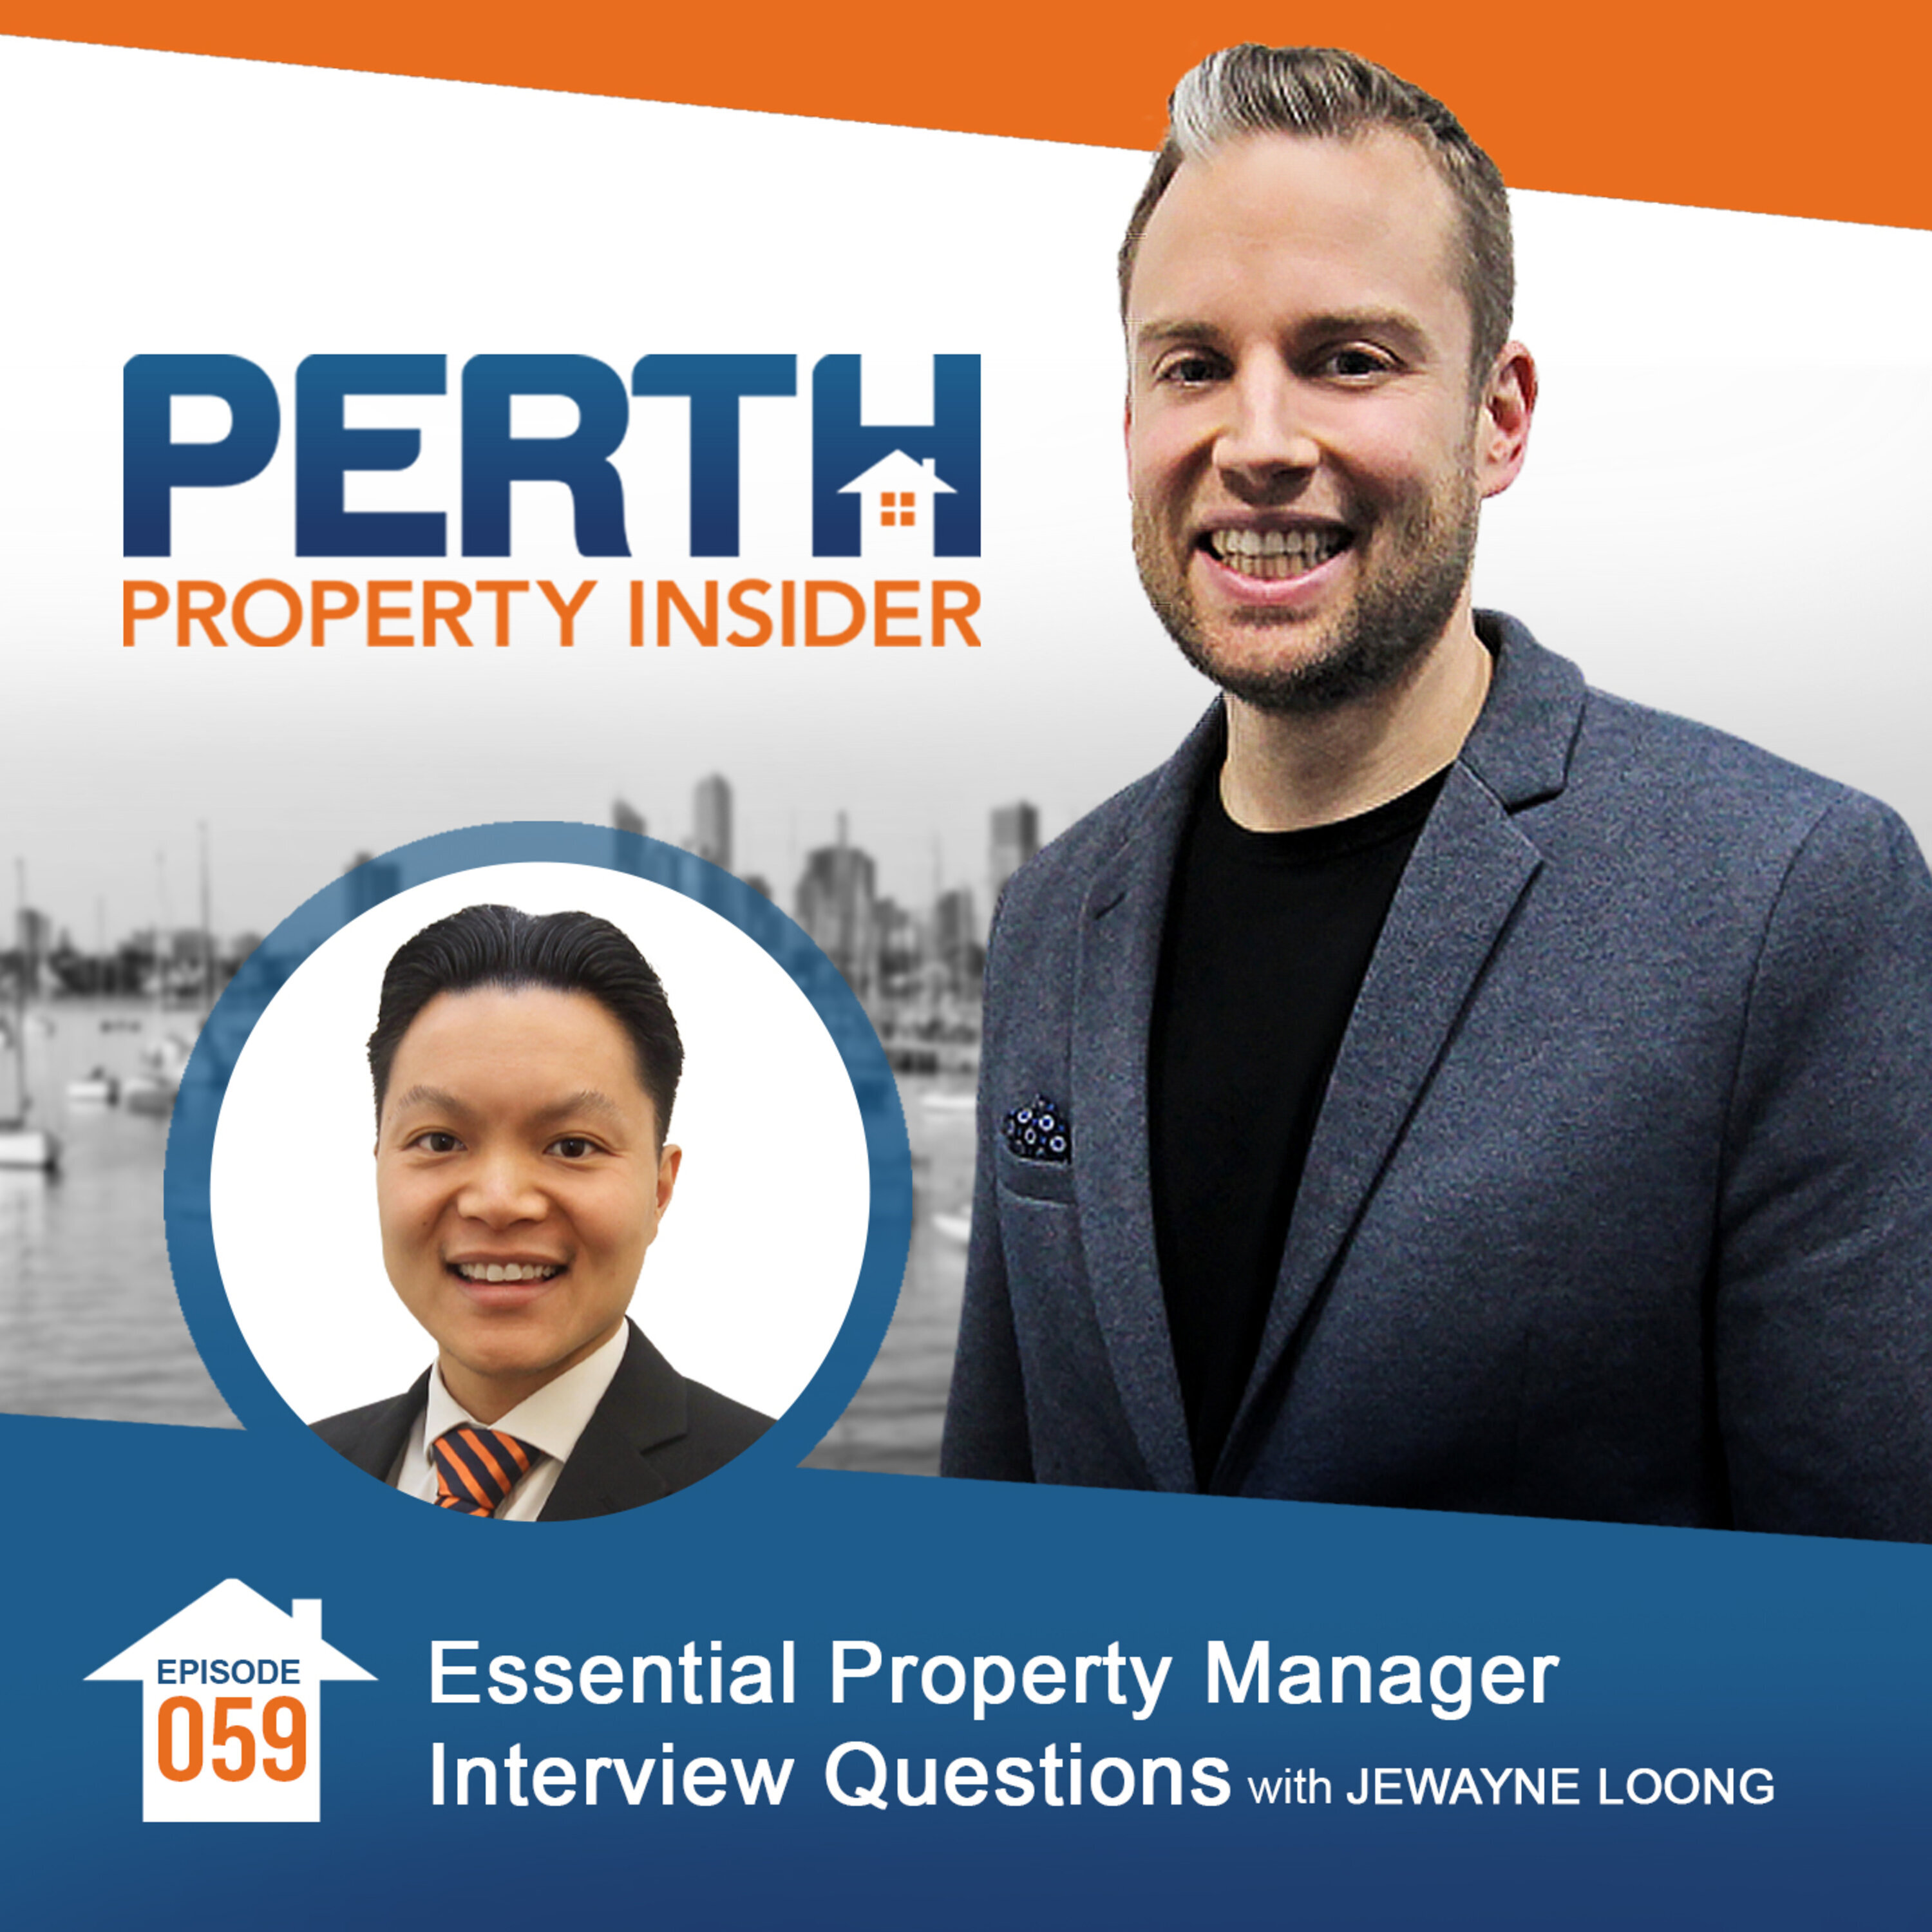 Essential Property Manager Interview Questions